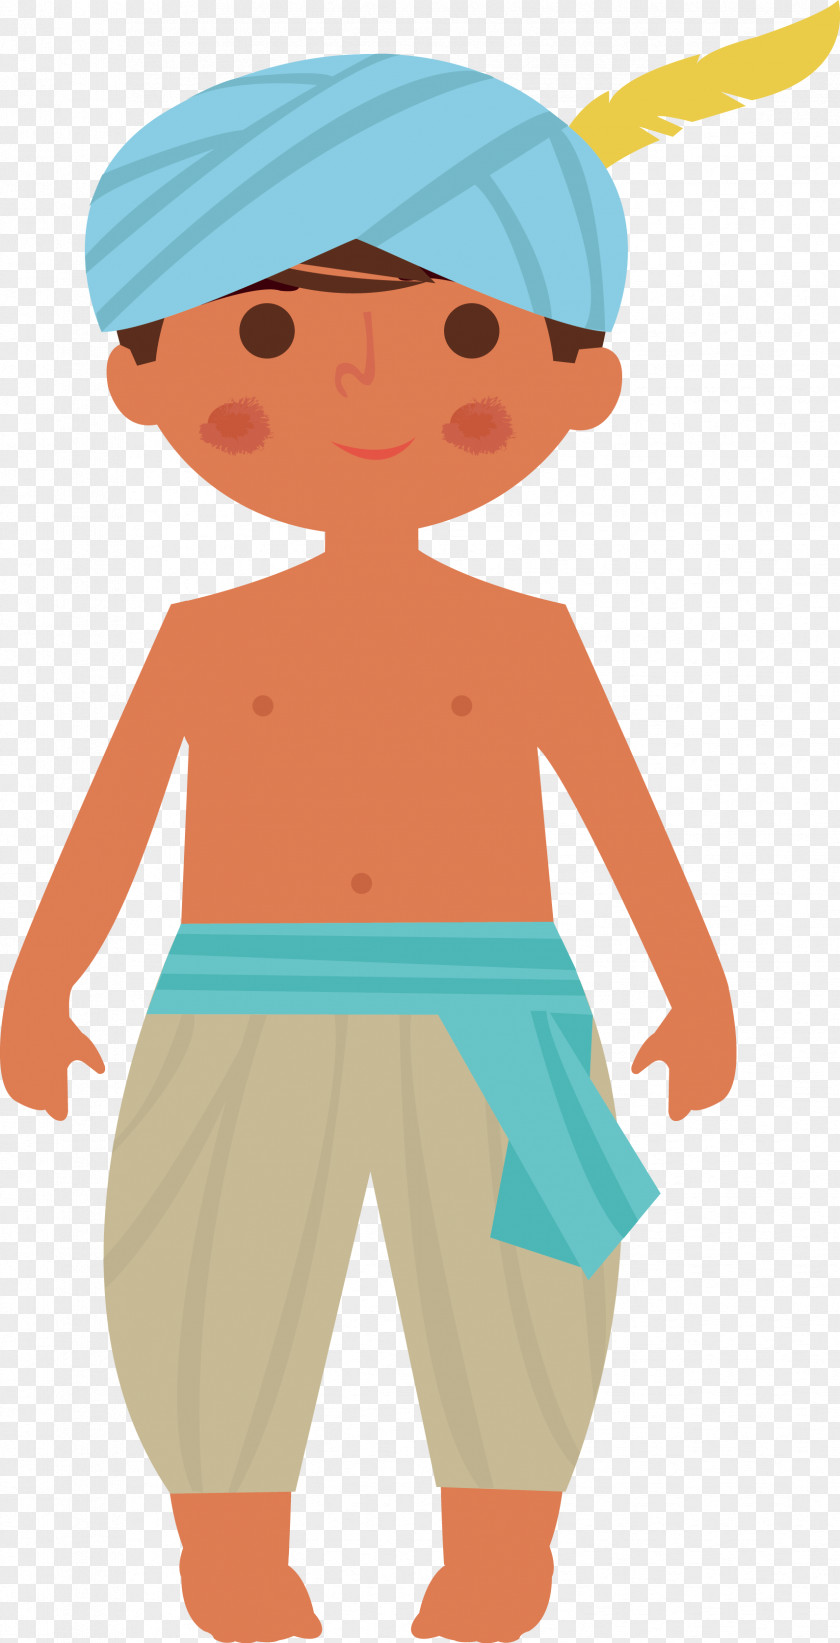 Indian Character Material India Boy Illustration PNG